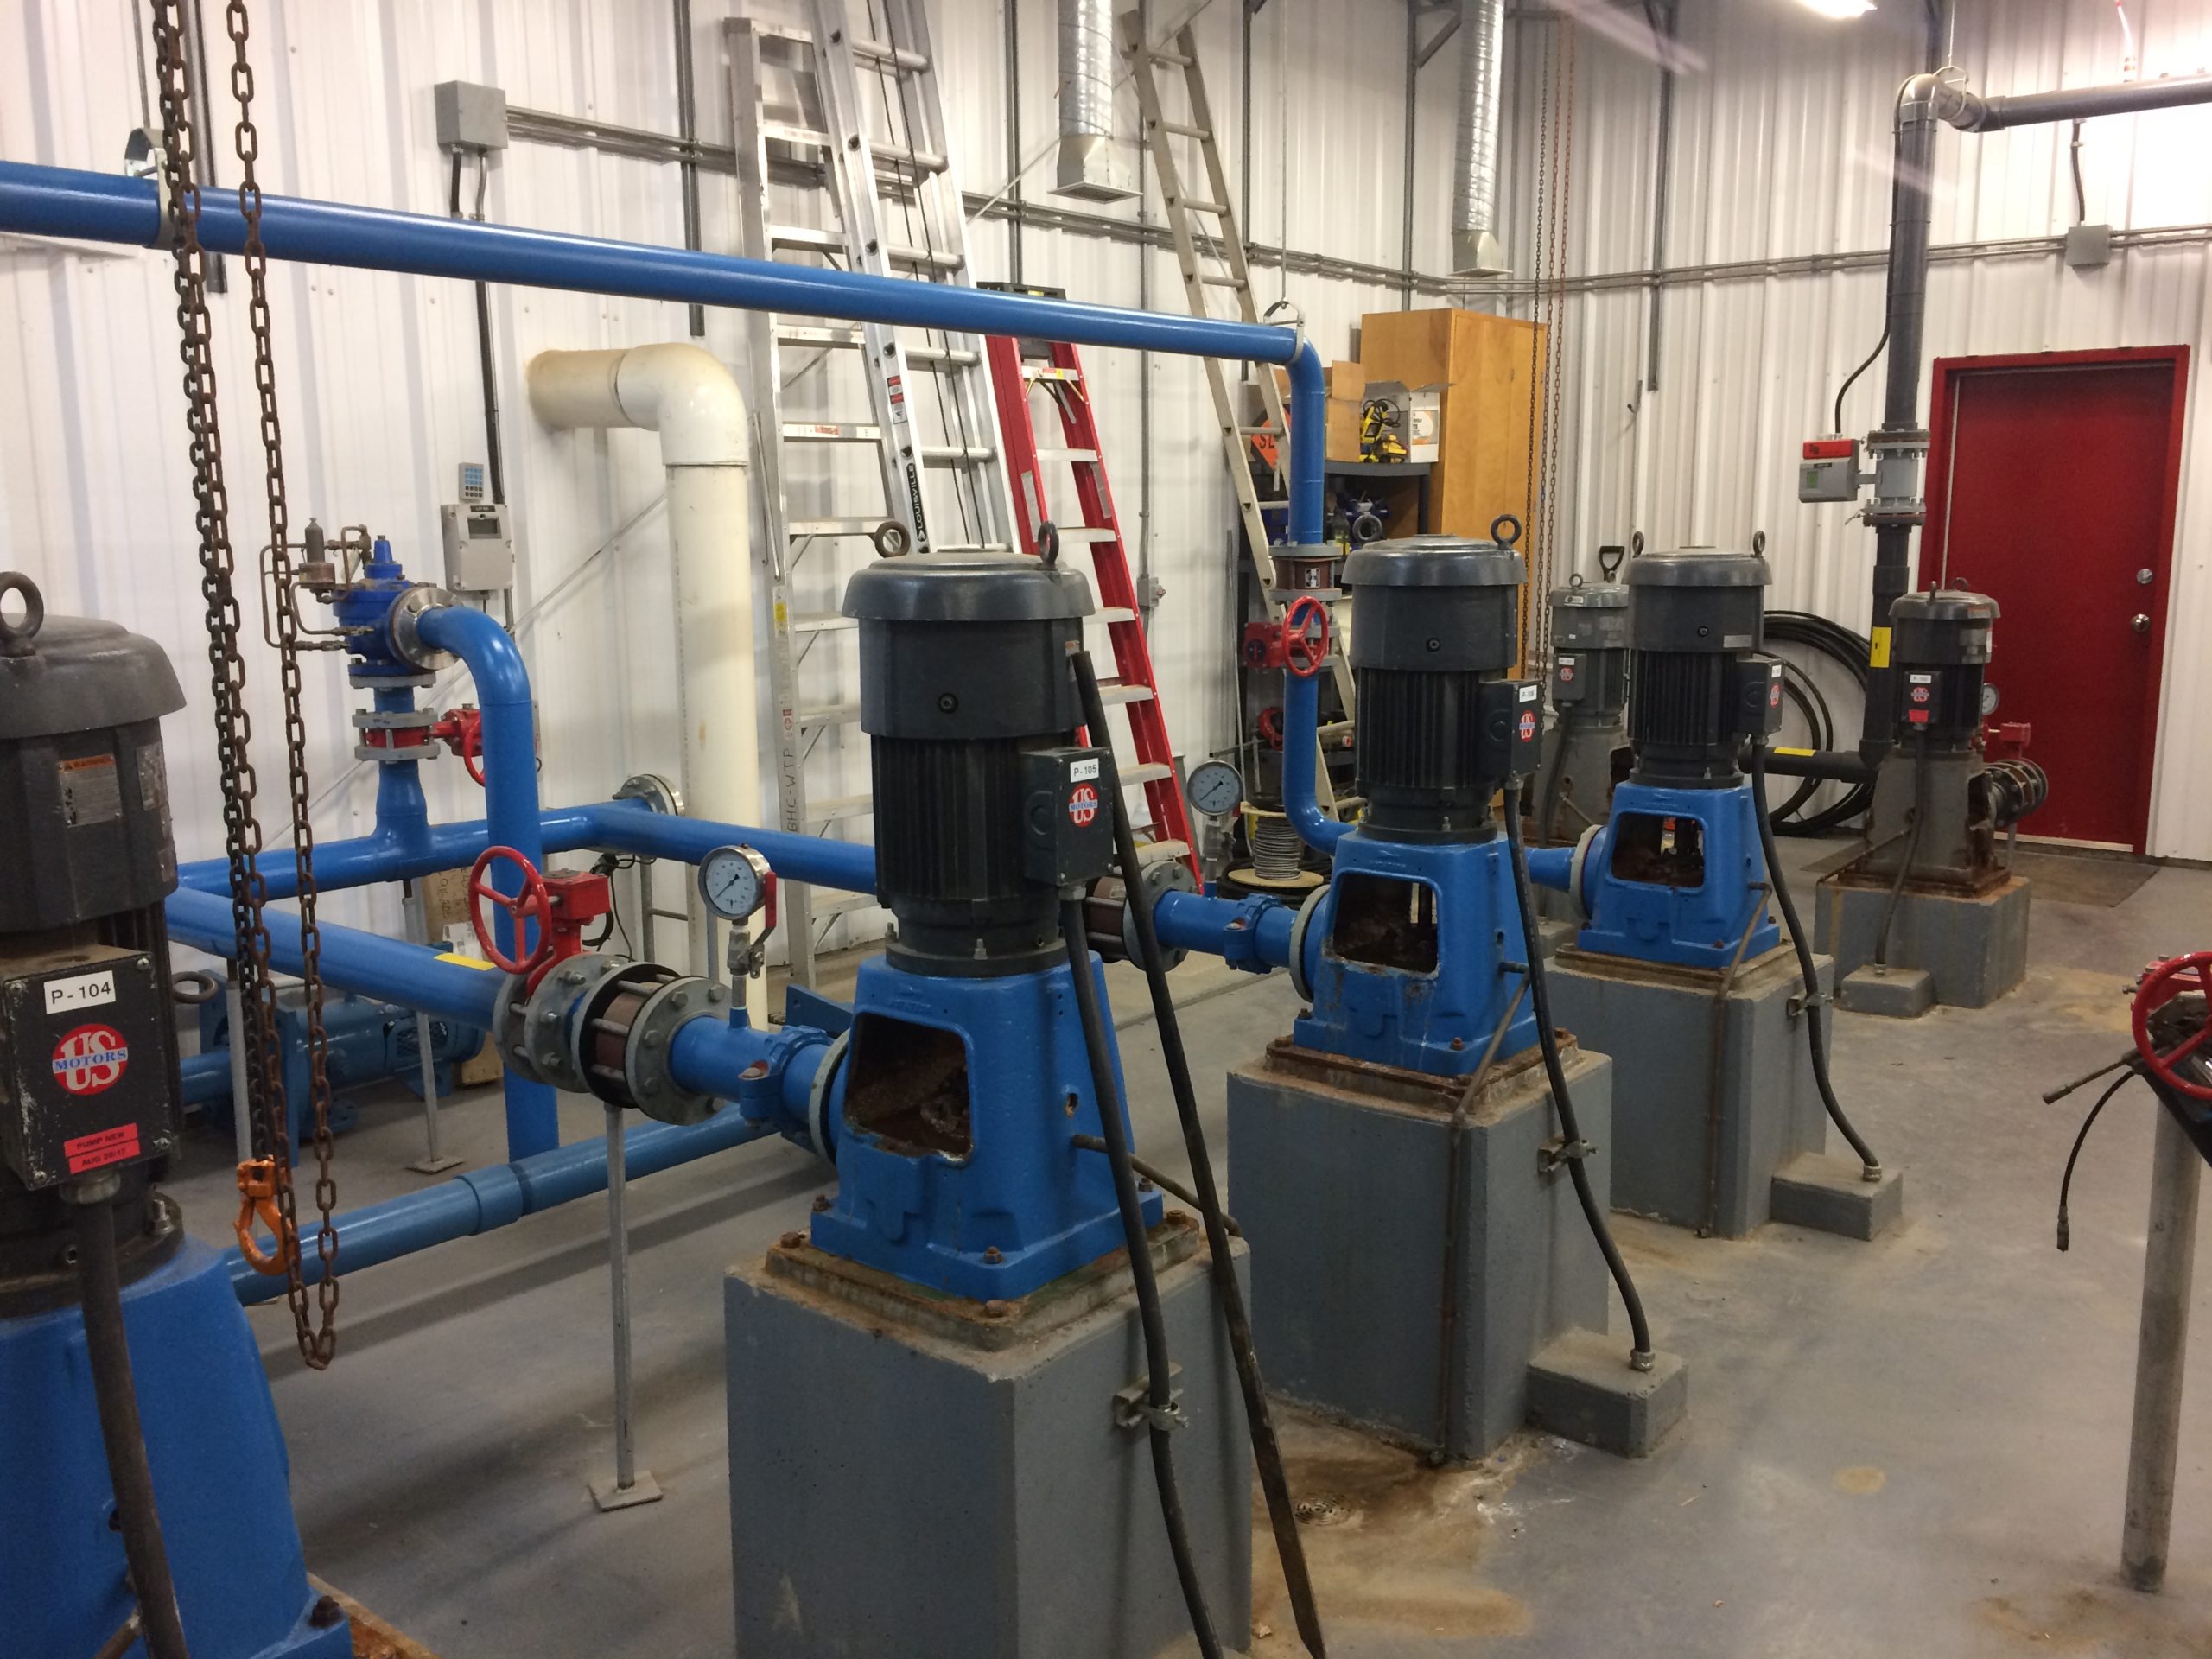 A group of industrial pumps in an industrial building.